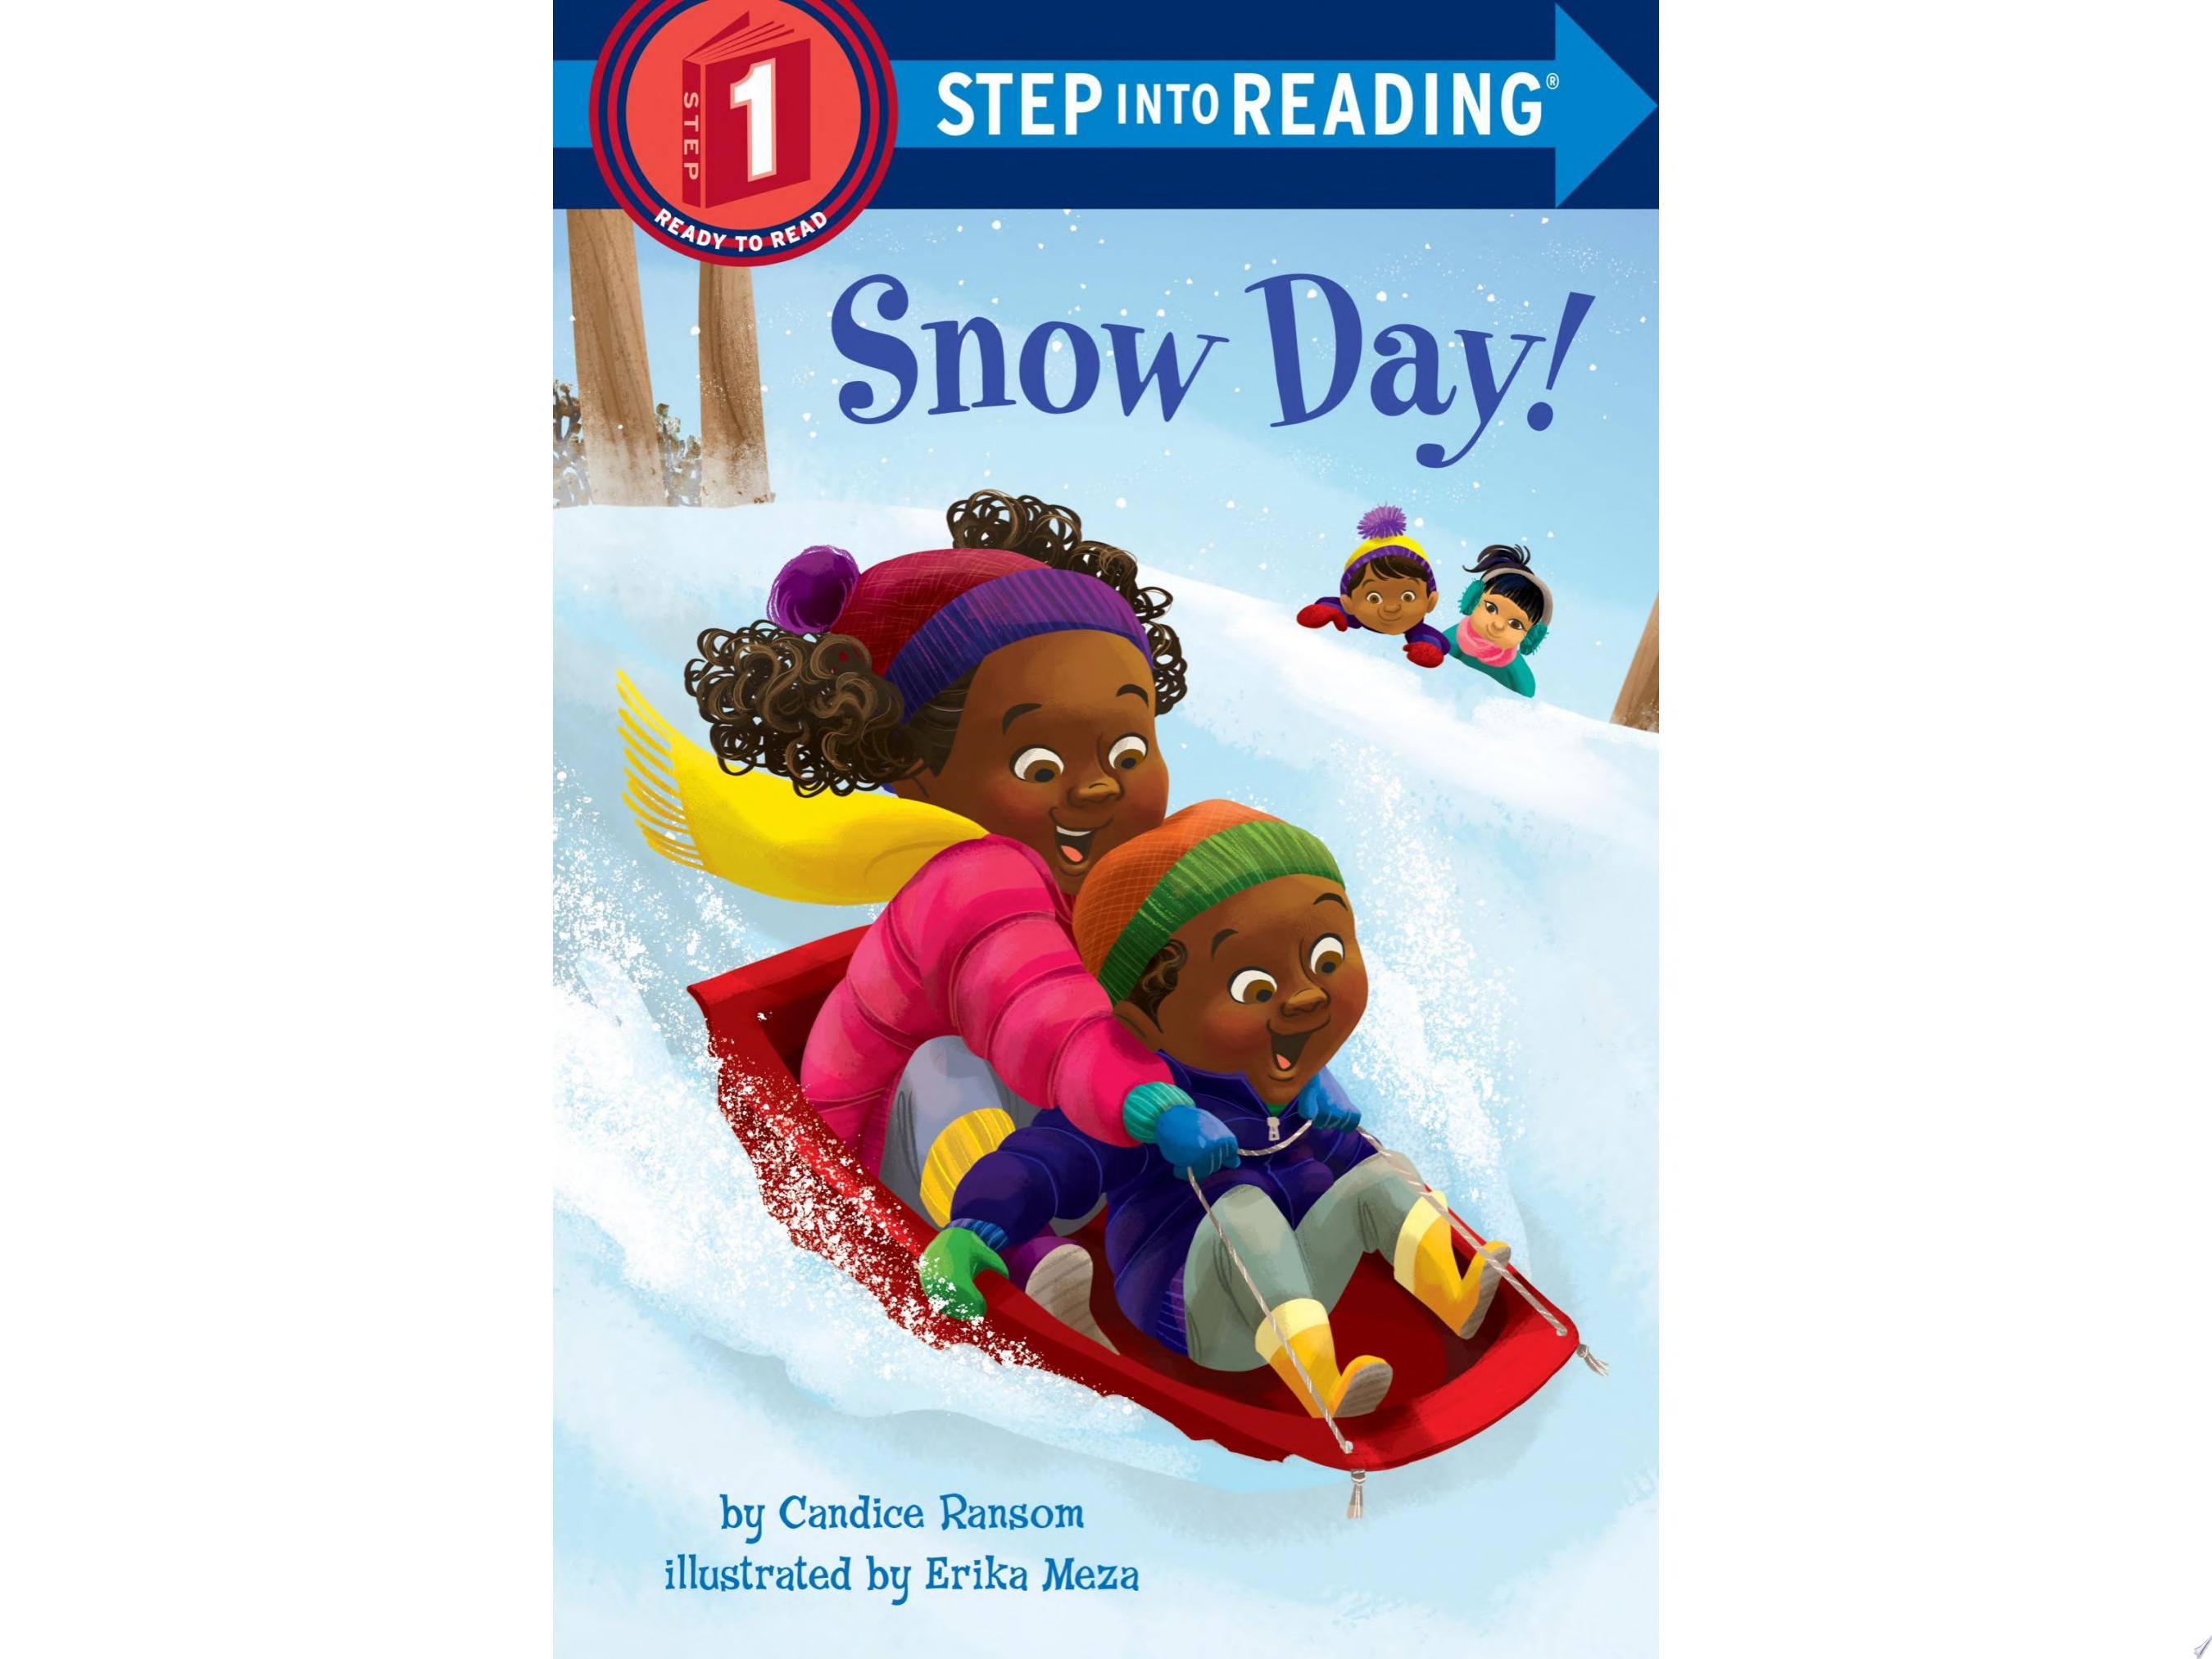 Image for "Snow Day!"